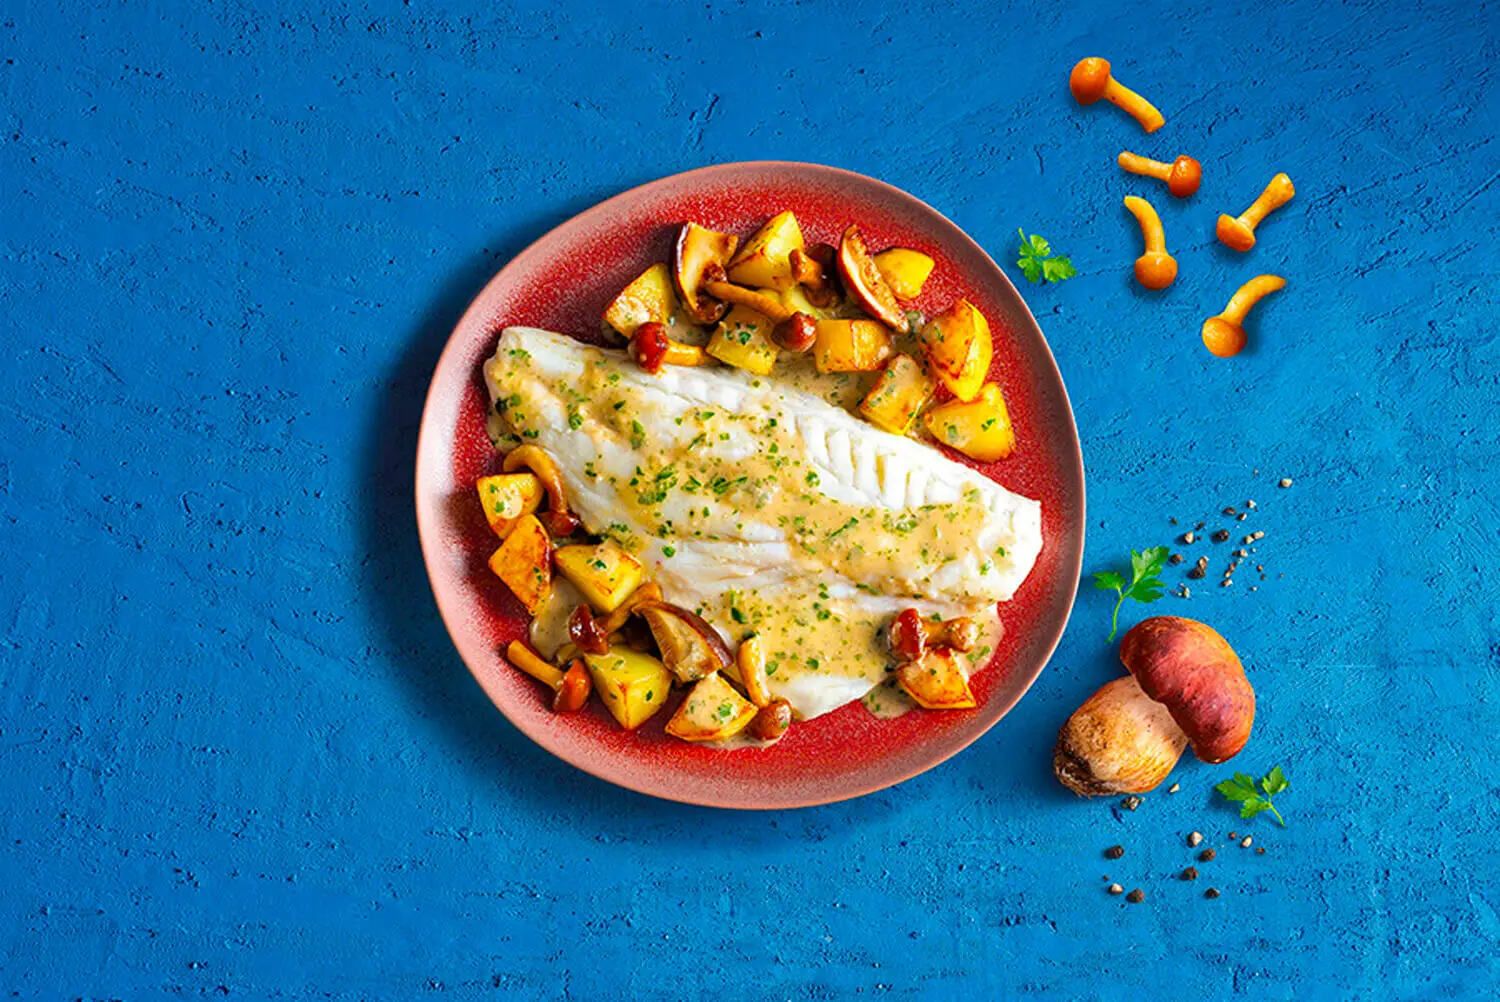 Mountain-style bream fillet with potatoes